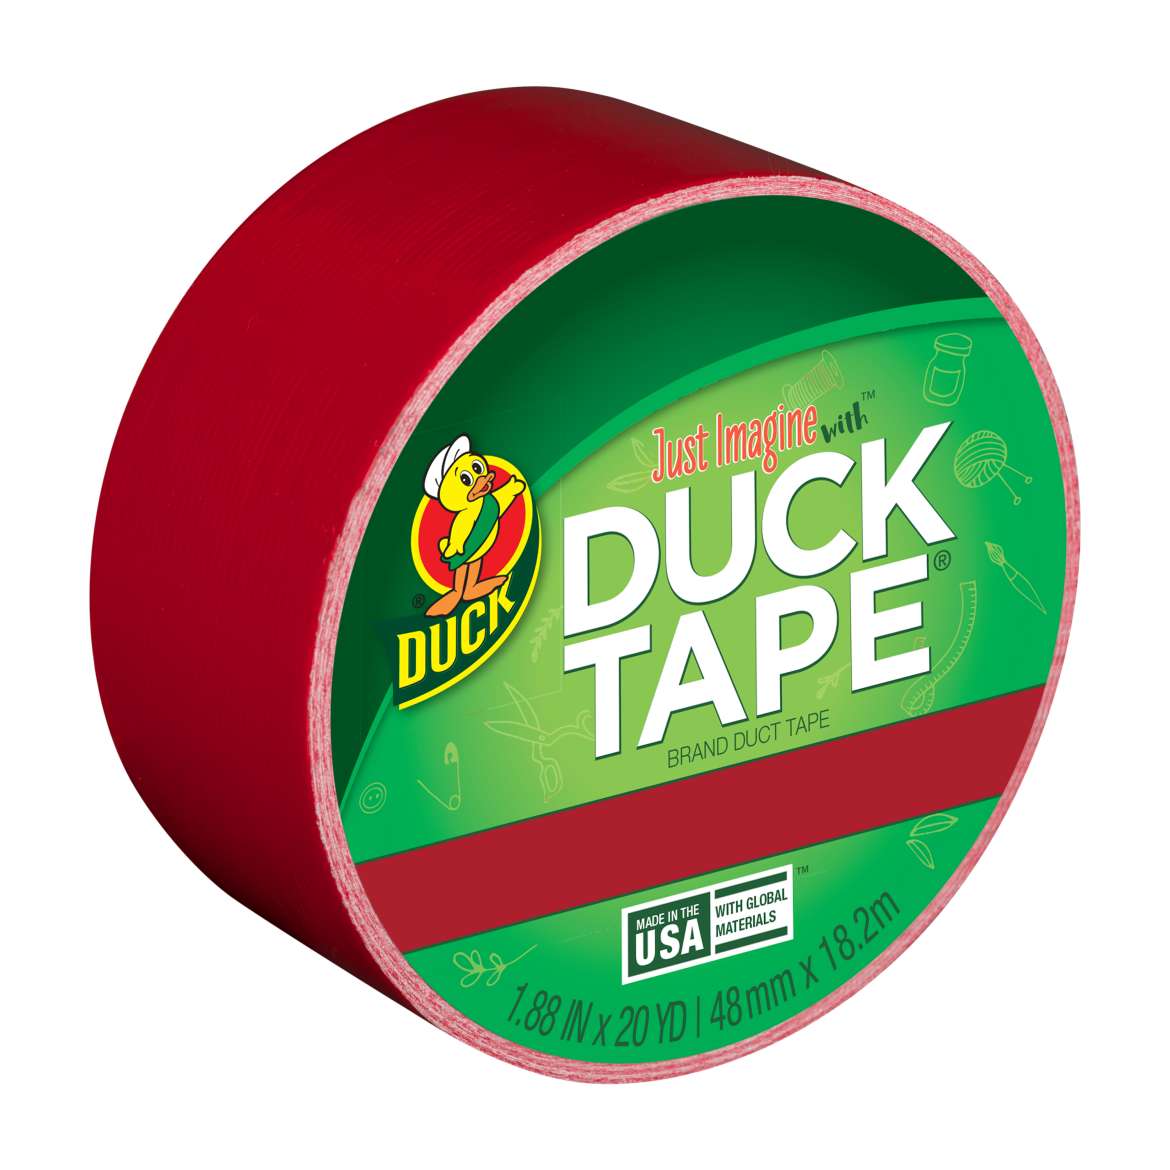 Color Duck Tape® Brand Duct Tape - Cha Cha Cherry, 1.88 in. x 20 yd.